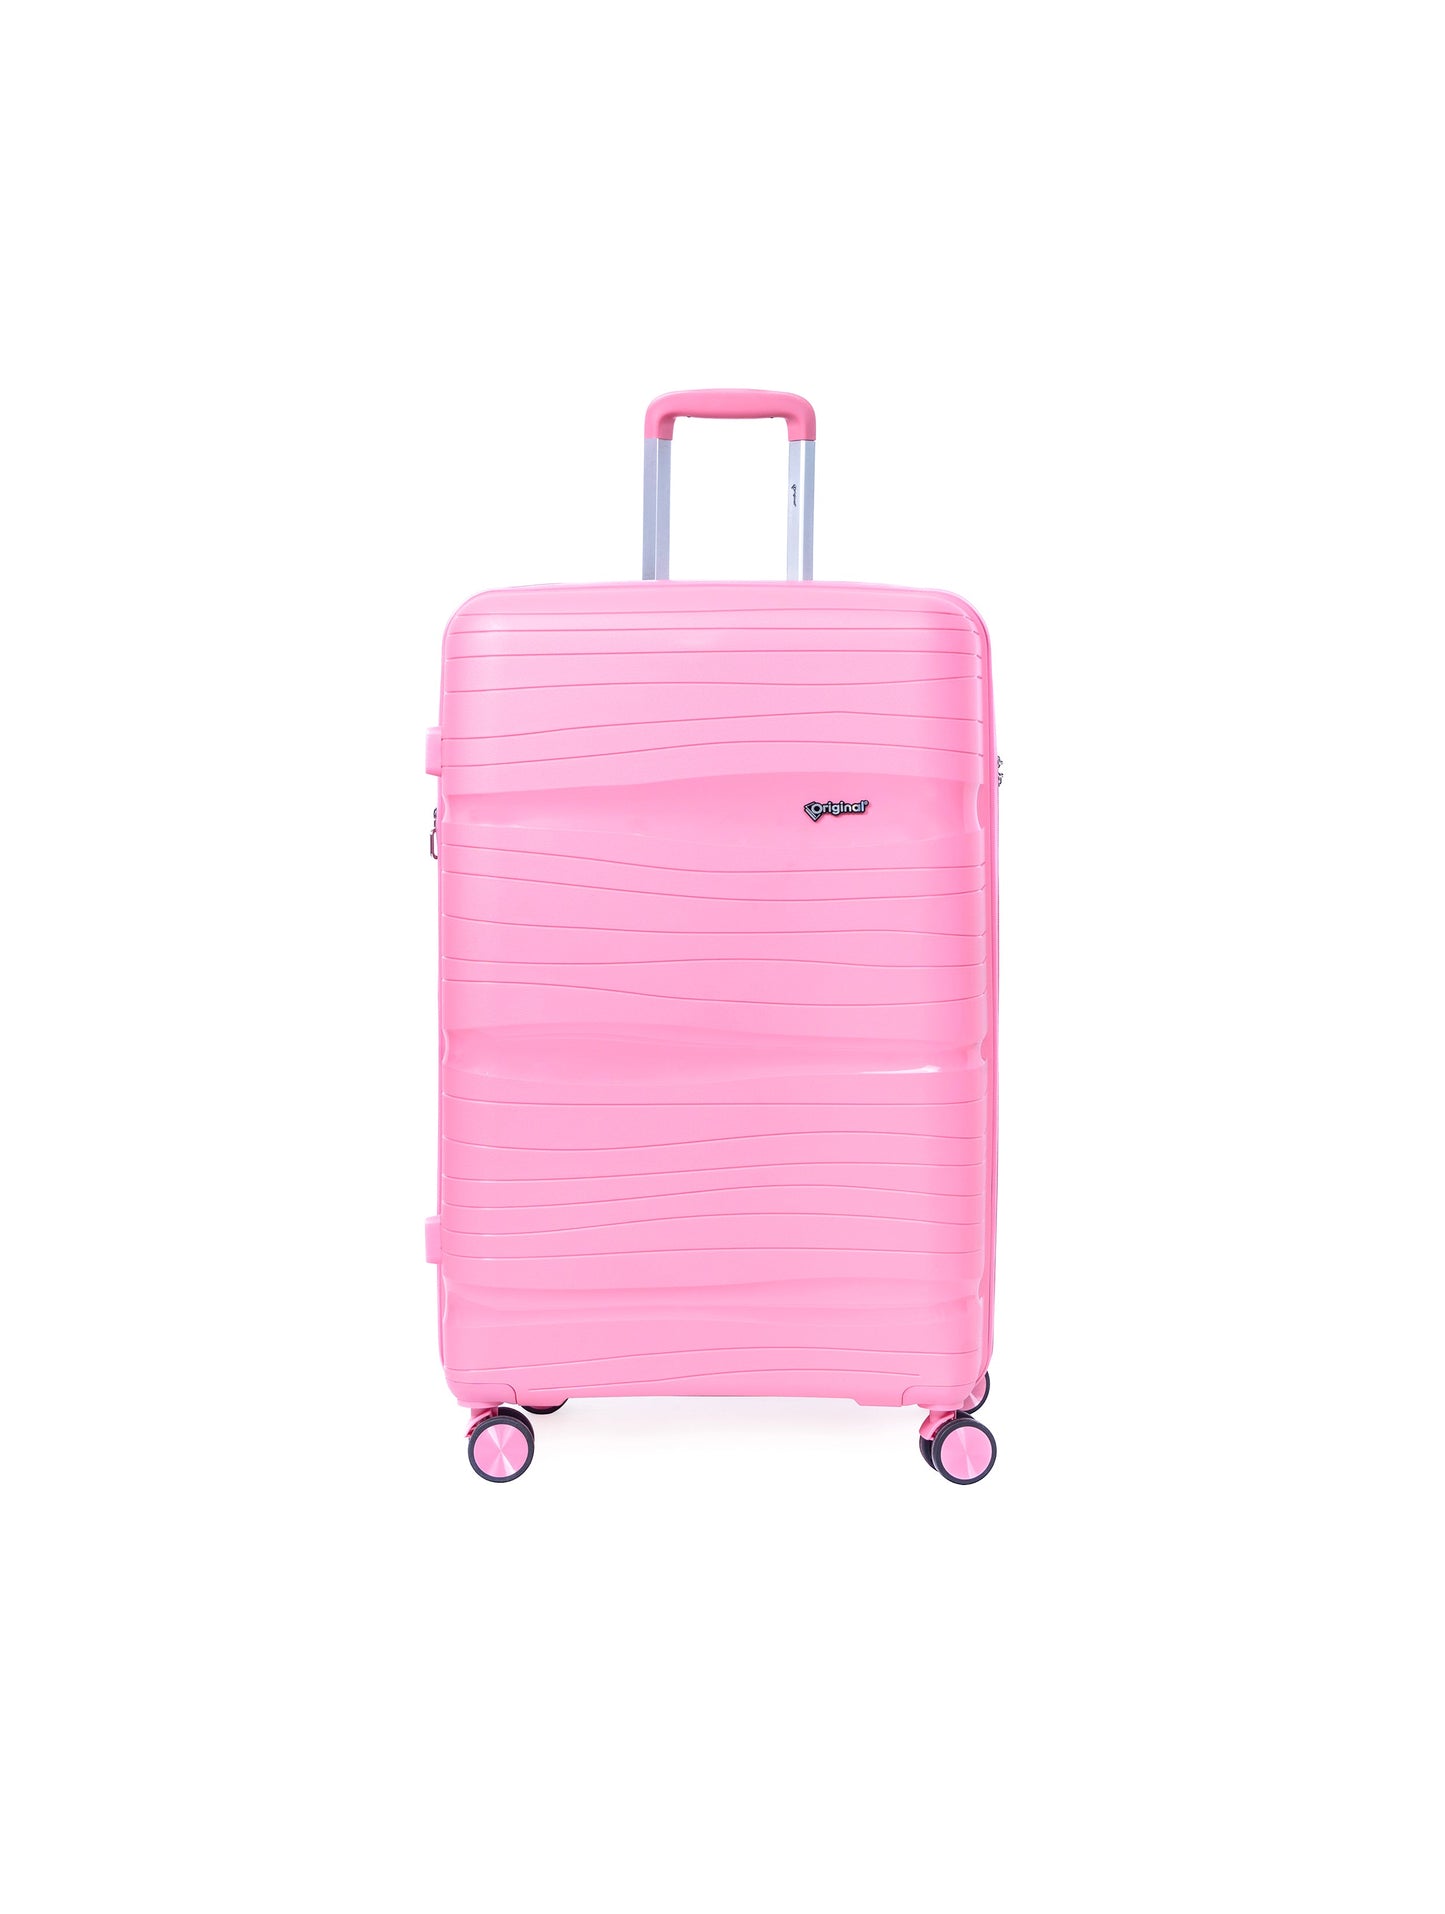 Original®-Mambo Trolley Bag Double Zipper Available in Single Pc Carry On Luggage/Checked In Luggage